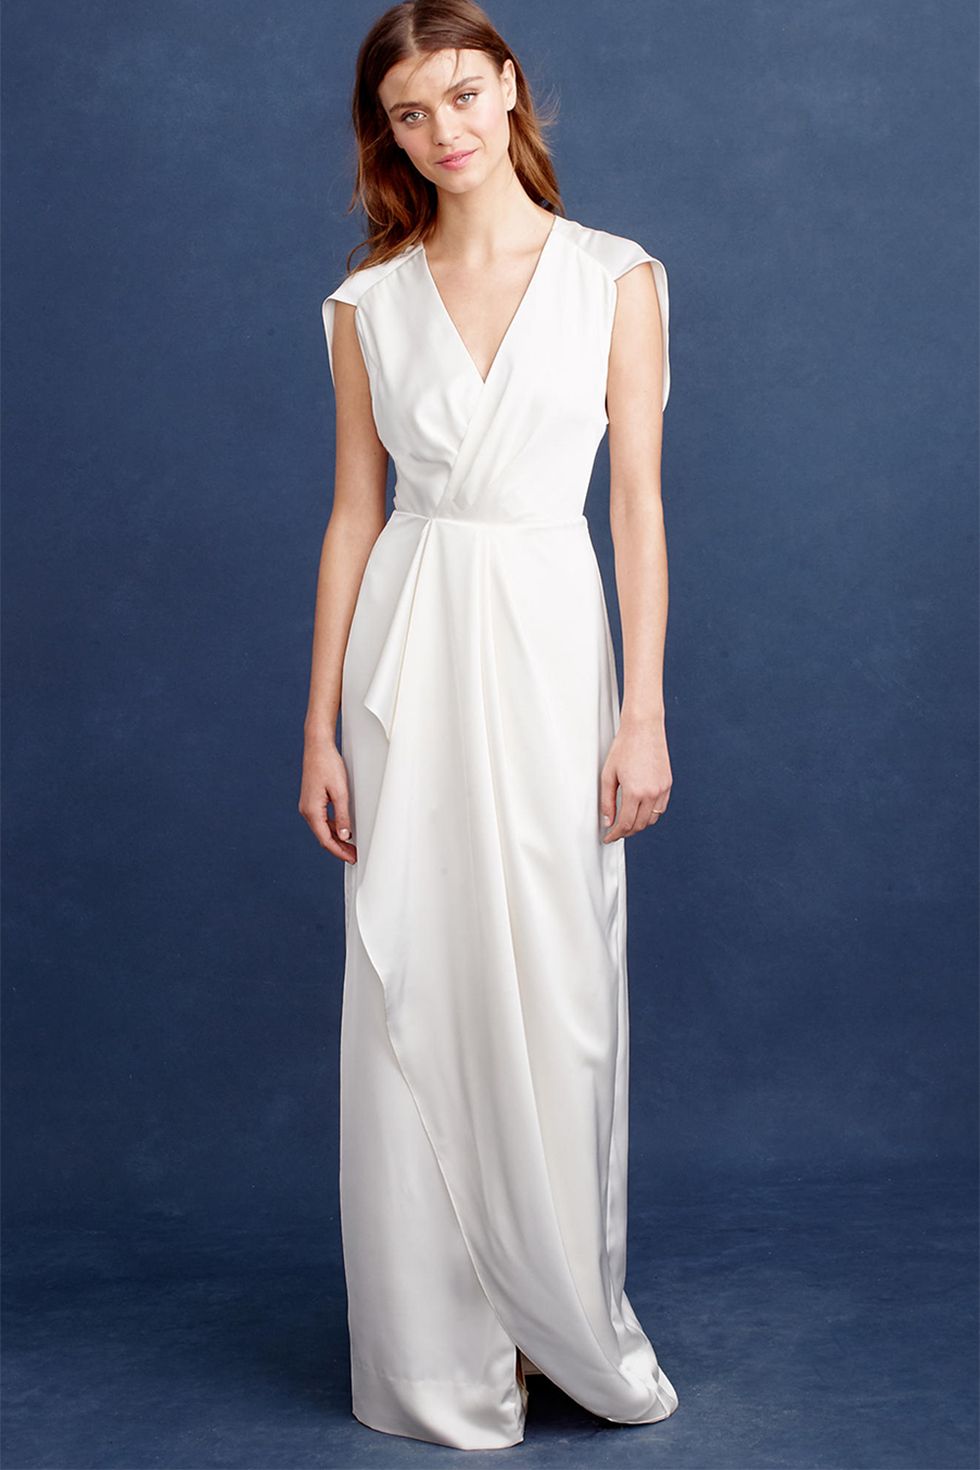 <p>The (only) specifically wedding gown they're selling right now is goddess-y (thank goodness), but some pretty pieces from their party collection do come in white, if you know what I mean.&nbsp;</p><p>$550, <a href="https://www.jcrew.com/p/E6824" target="_blank" data-tracking-id="recirc-text-link">jcrew.com</a>.</p>